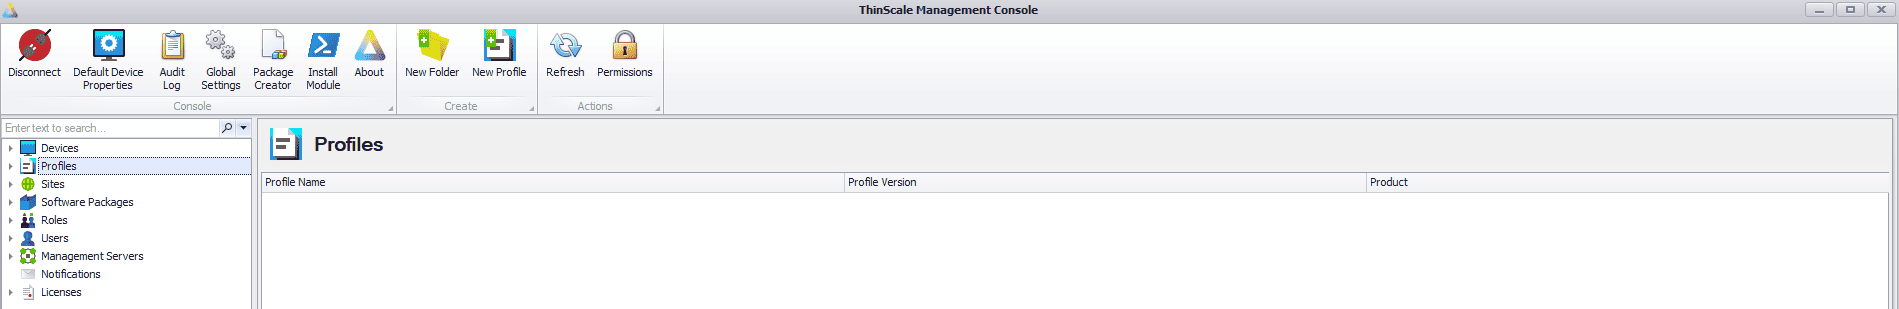 TS Mgmt Console